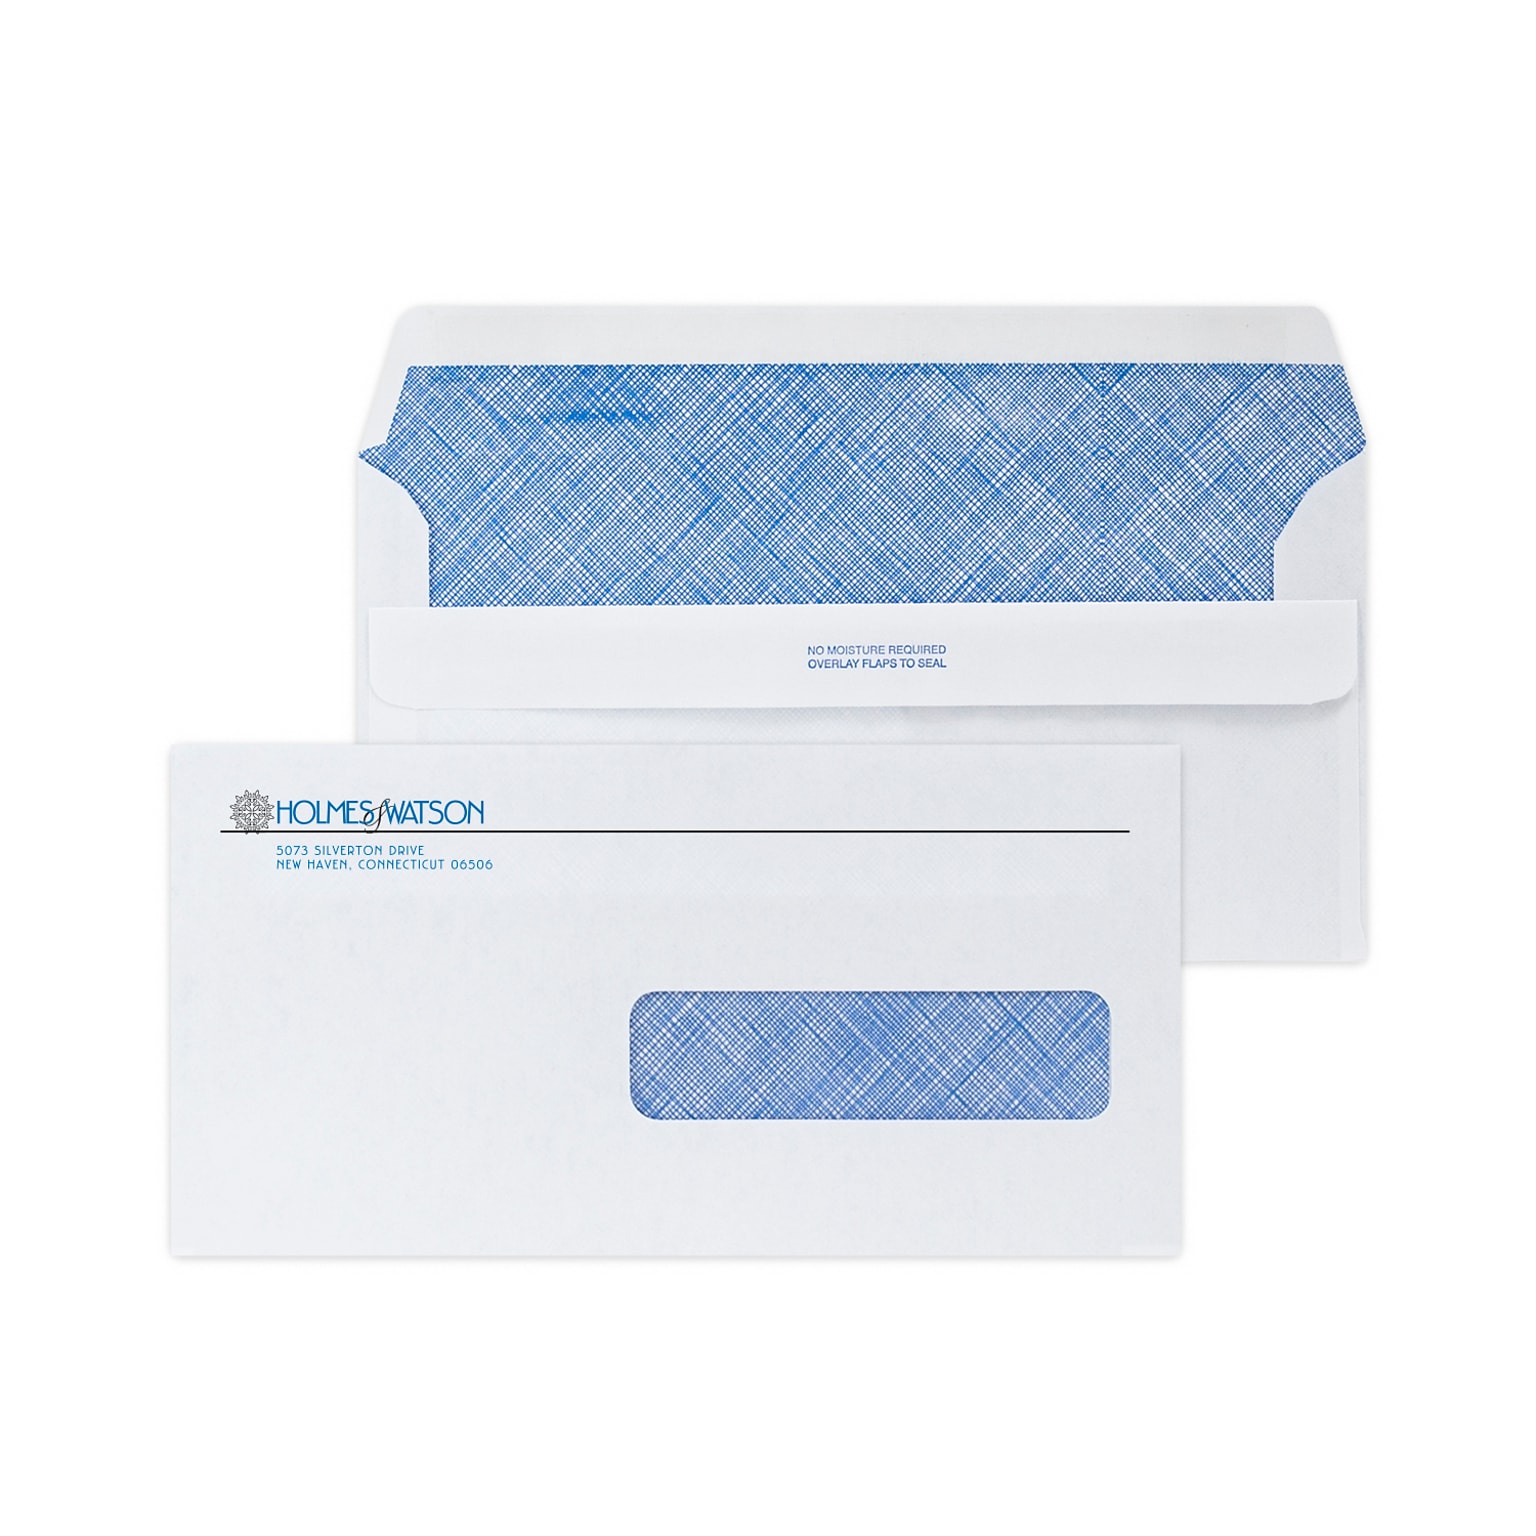 Custom 4-1/2x9 Insurance Claim Right Window Self Seal Envelopes with Security Tint, 24# White Wove, 2 Standard Inks, 250/Pack